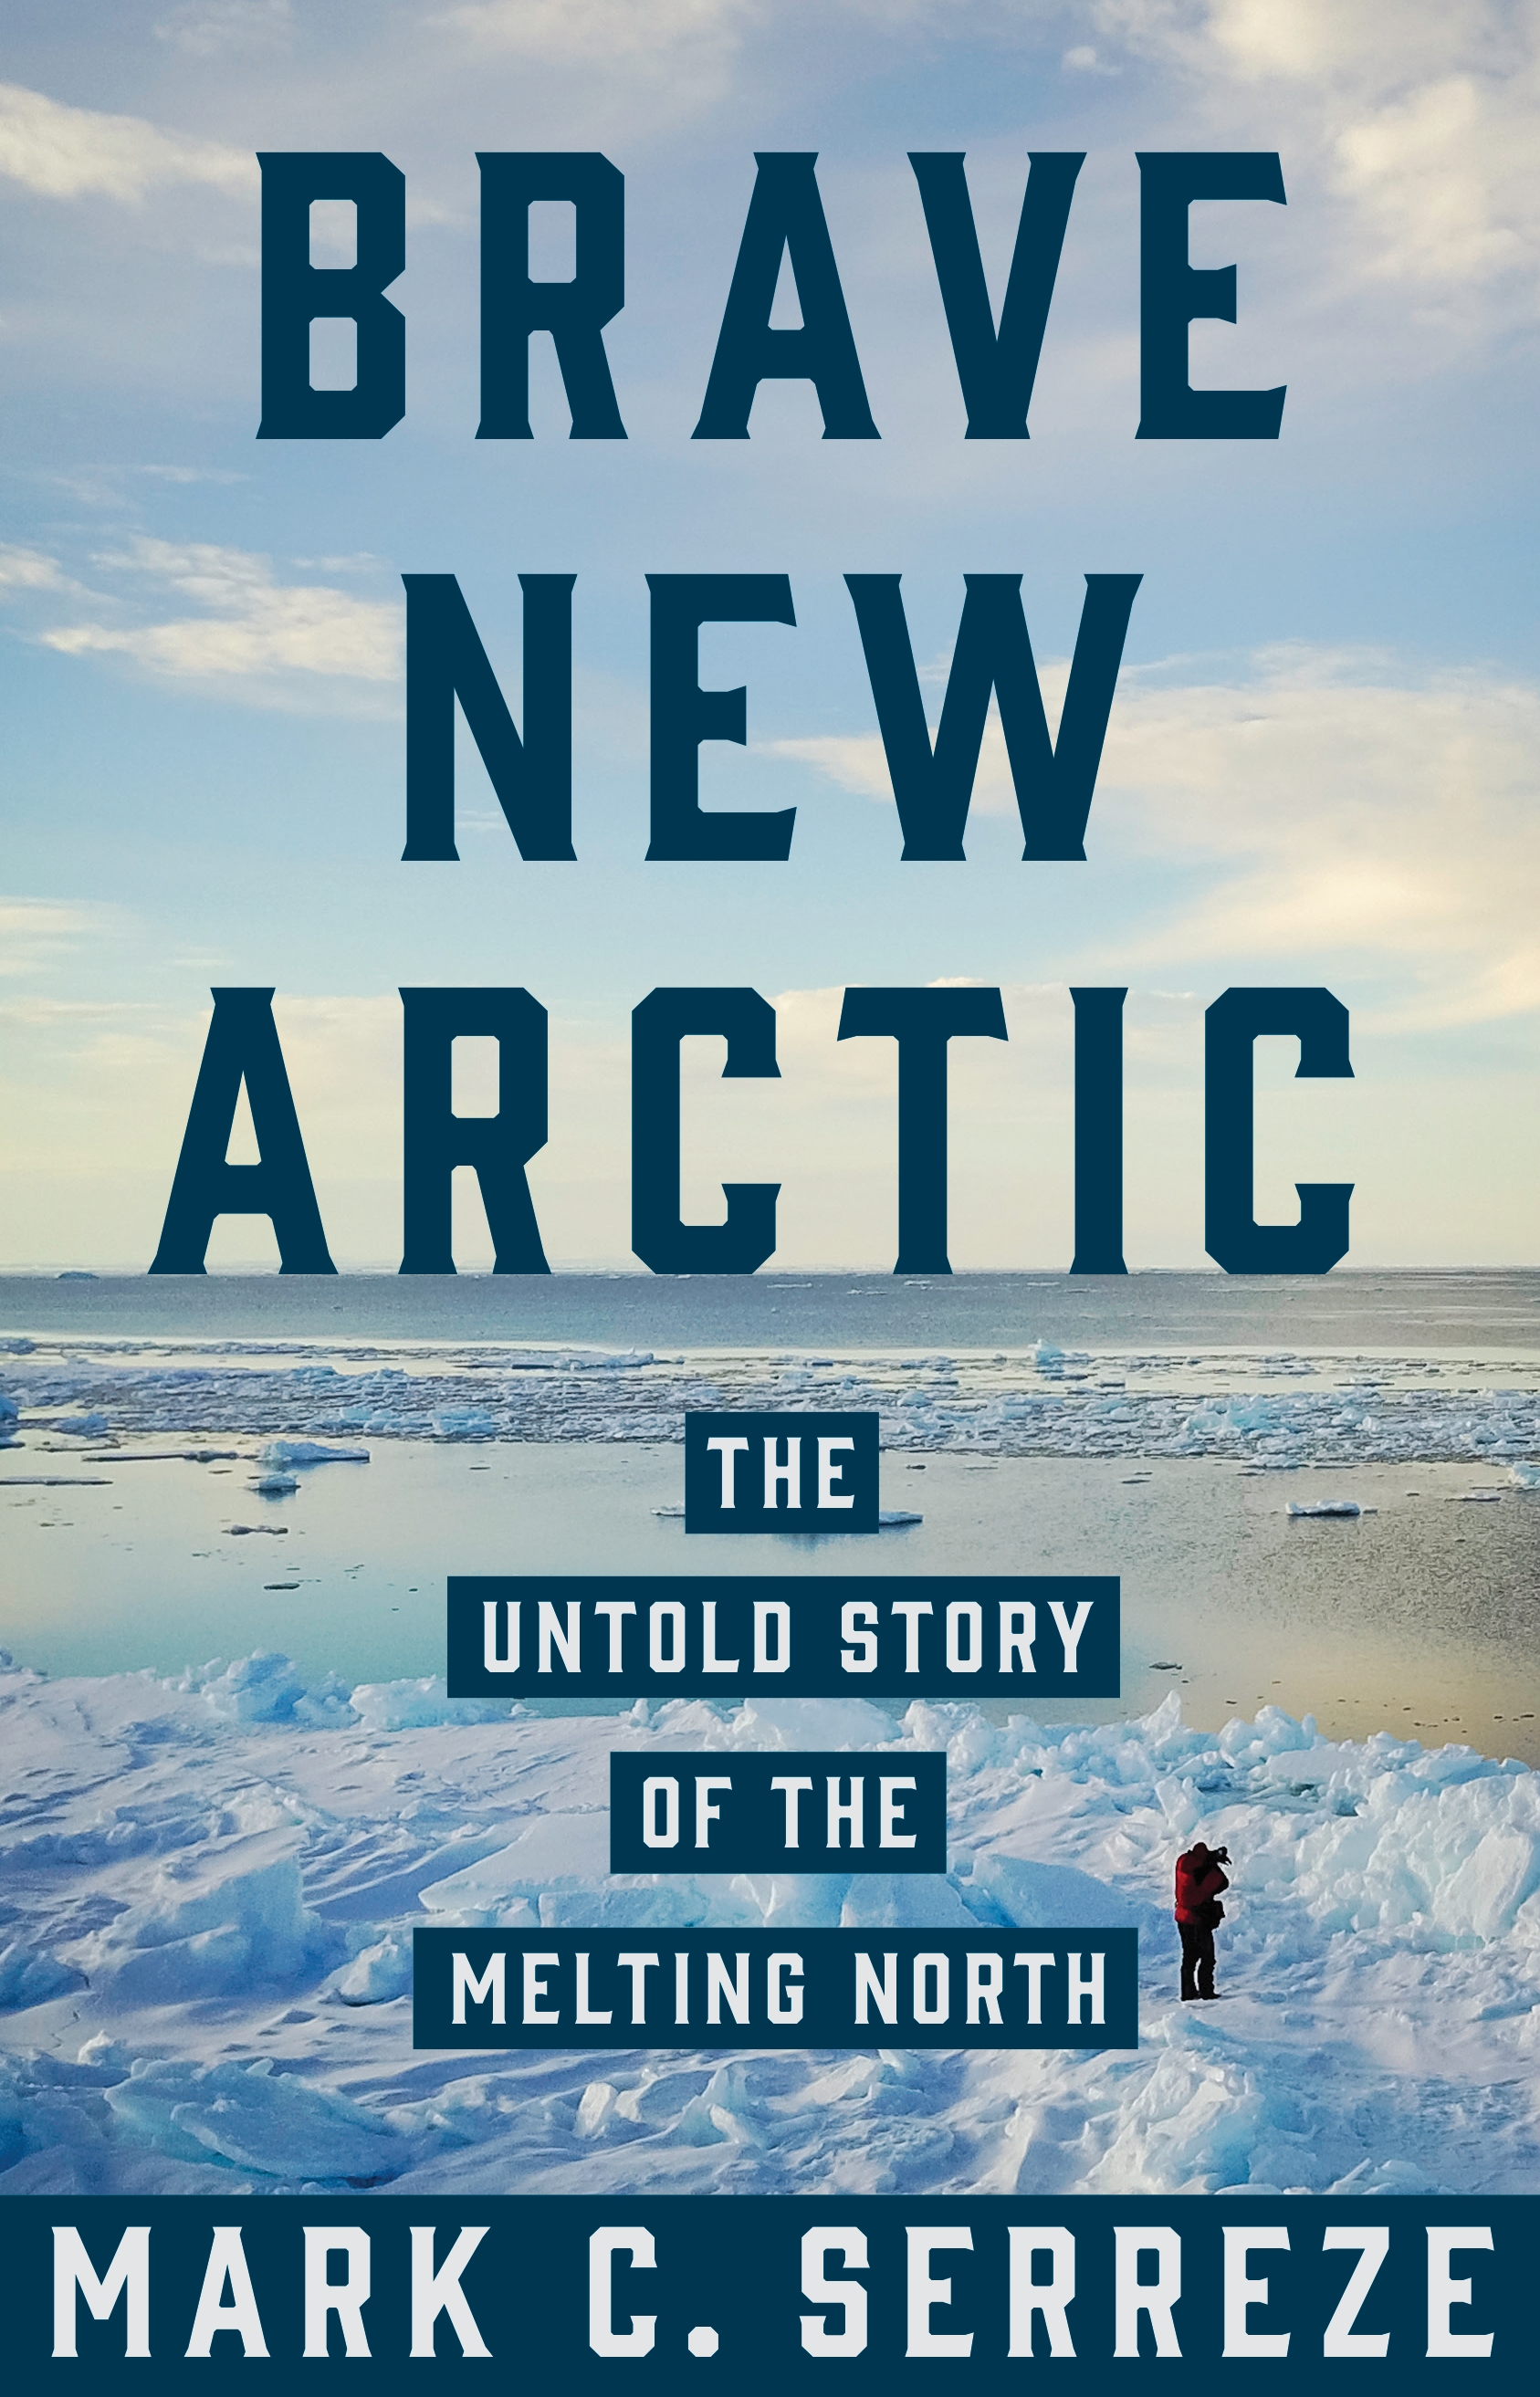 Book cover "Brave New Arctic".